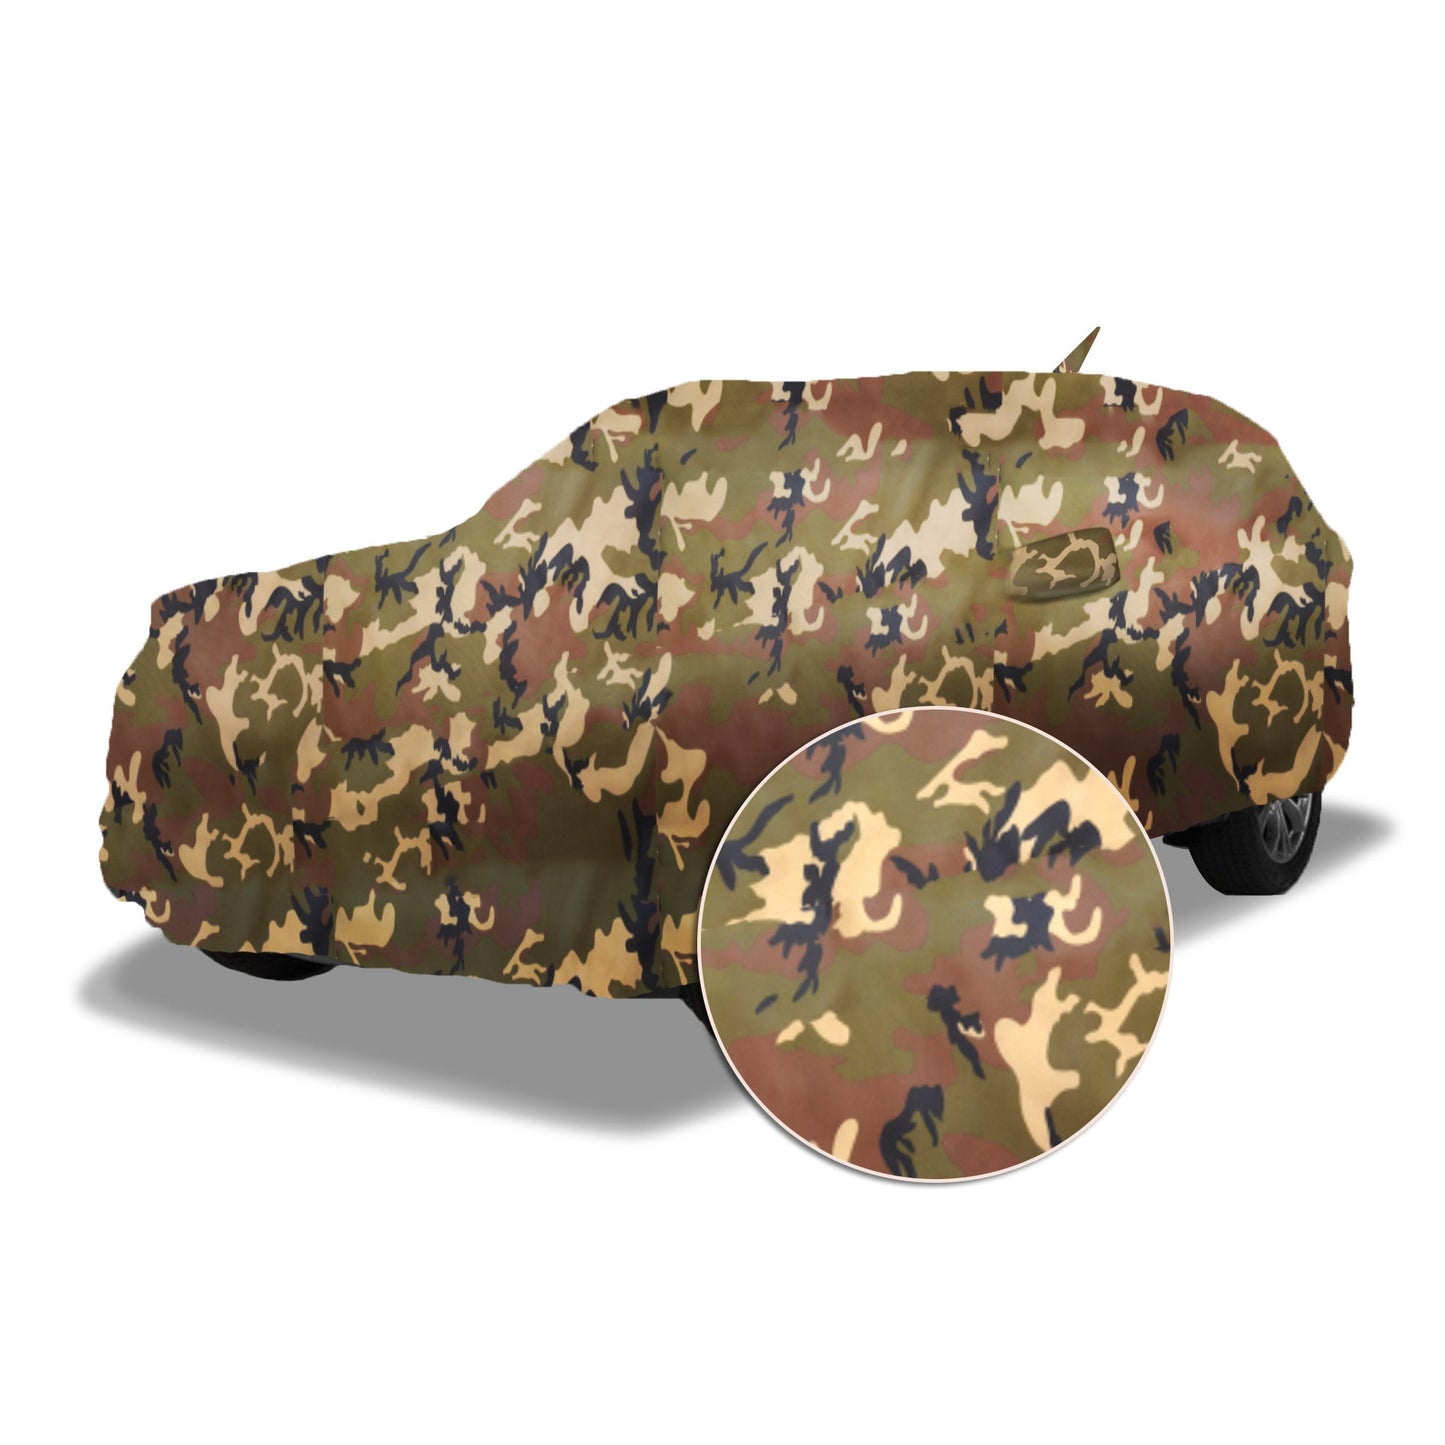 Ascot Kia Seltos X Line / Seltos X Line Facelift Car Body Cover Extra Strong & Dust Proof Jungle Military Car Cover with UV Proof & Water-Resistant Coating